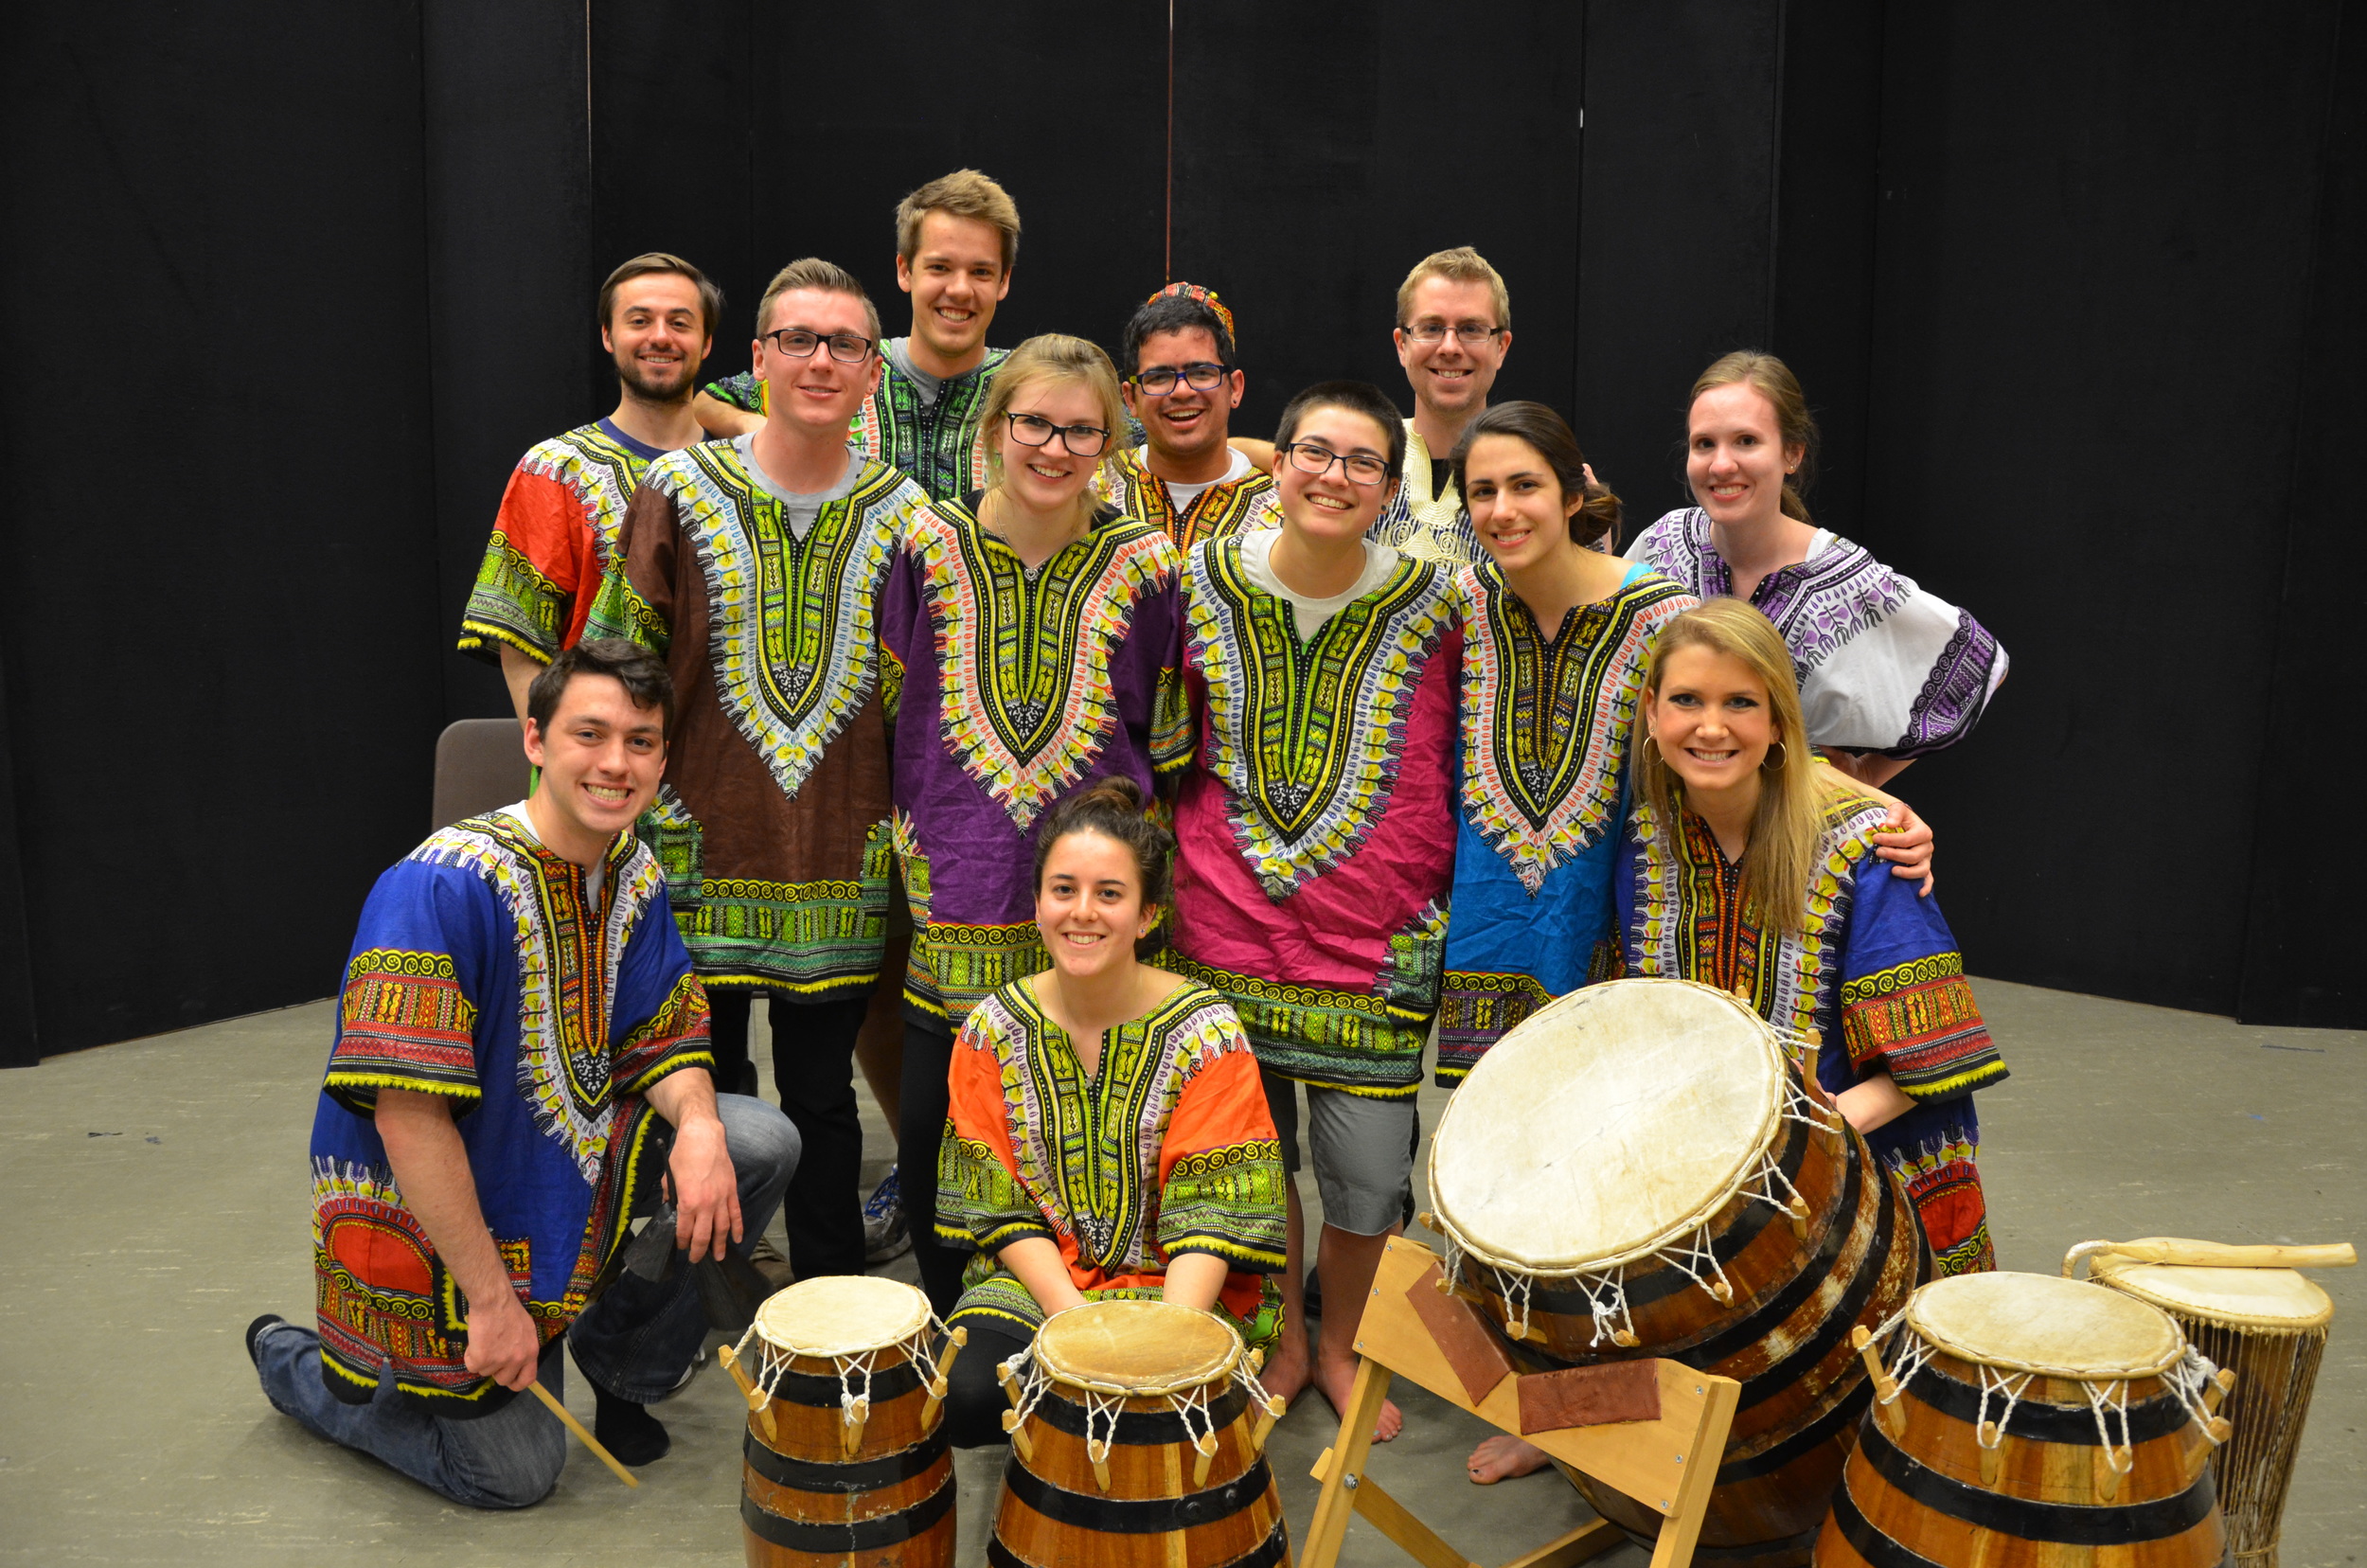  Performers from "African Roots" percussion concert at the University of Michigan '15 